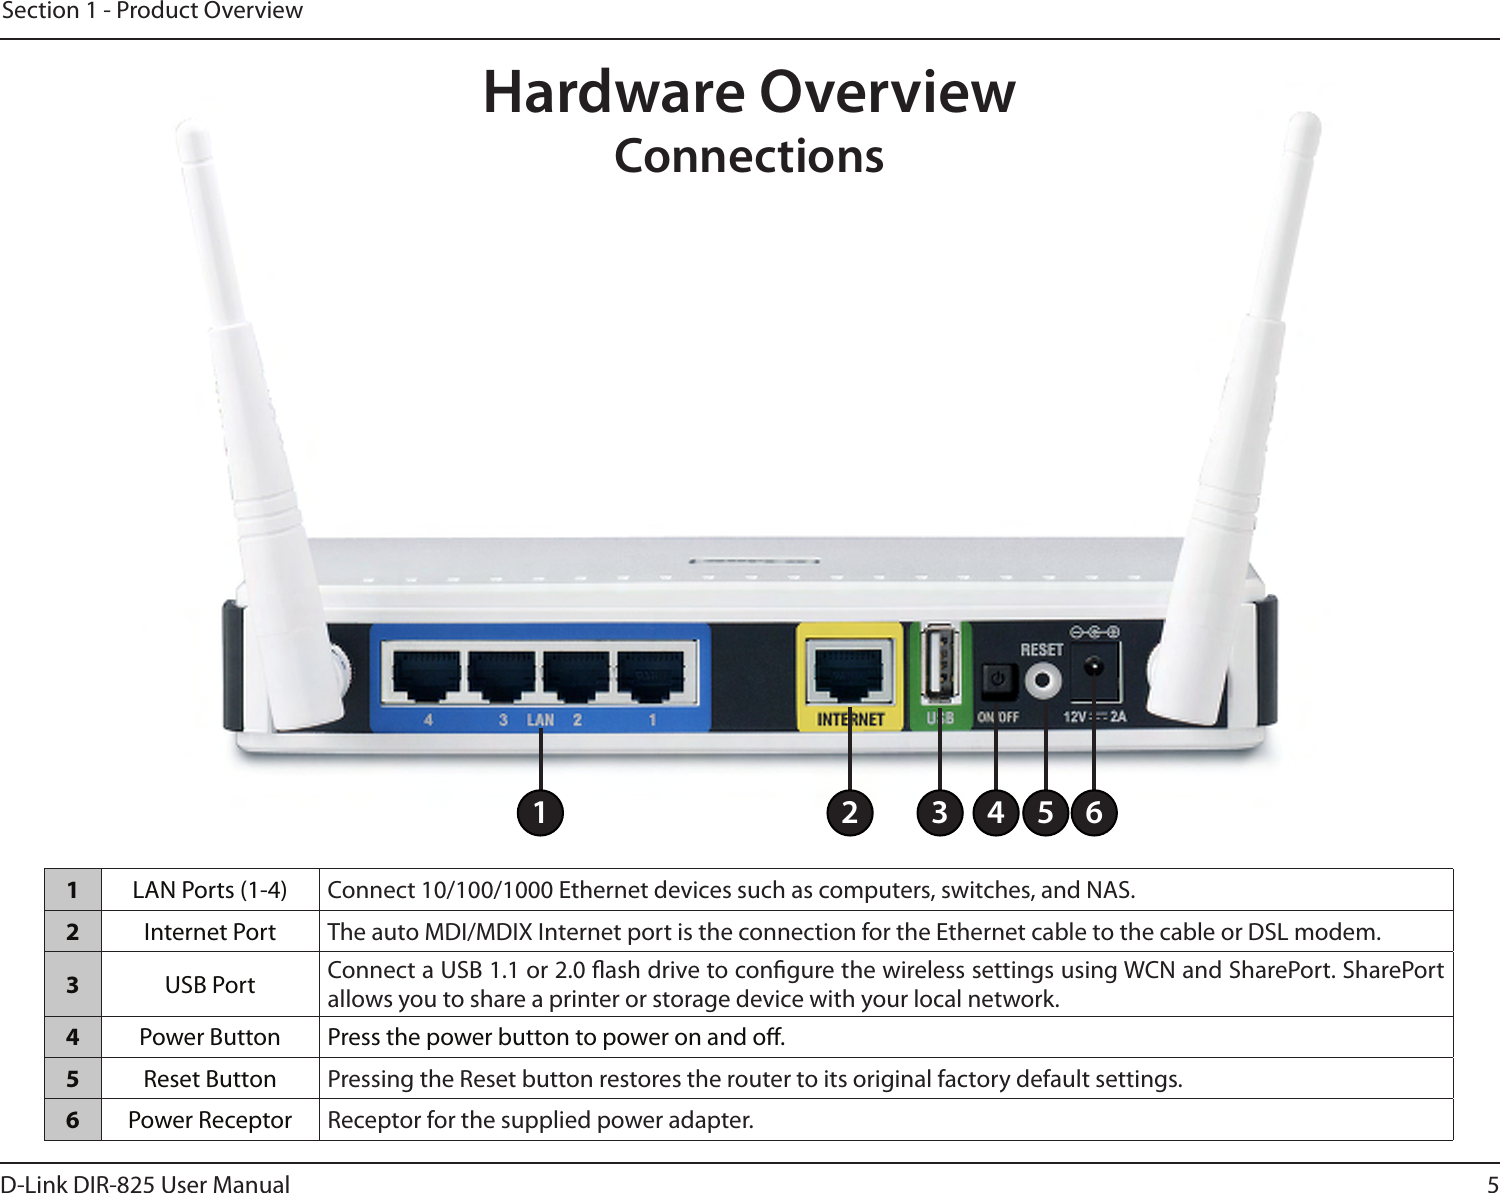 5D-Link DIR-825 User ManualSection 1 - Product OverviewHardware OverviewConnections1LAN Ports (1-4) Connect 10/100/1000 Ethernet devices such as computers, switches, and NAS.2Internet Port The auto MDI/MDIX Internet port is the connection for the Ethernet cable to the cable or DSL modem.3USB Port Connect a USB 1.1 or 2.0 ash drive to congure the wireless settings using WCN and SharePort. SharePort allows you to share a printer or storage device with your local network.4Power Button Press the power button to power on and o.5Reset Button Pressing the Reset button restores the router to its original factory default settings.6Power Receptor Receptor for the supplied power adapter.1 2 3 4 65